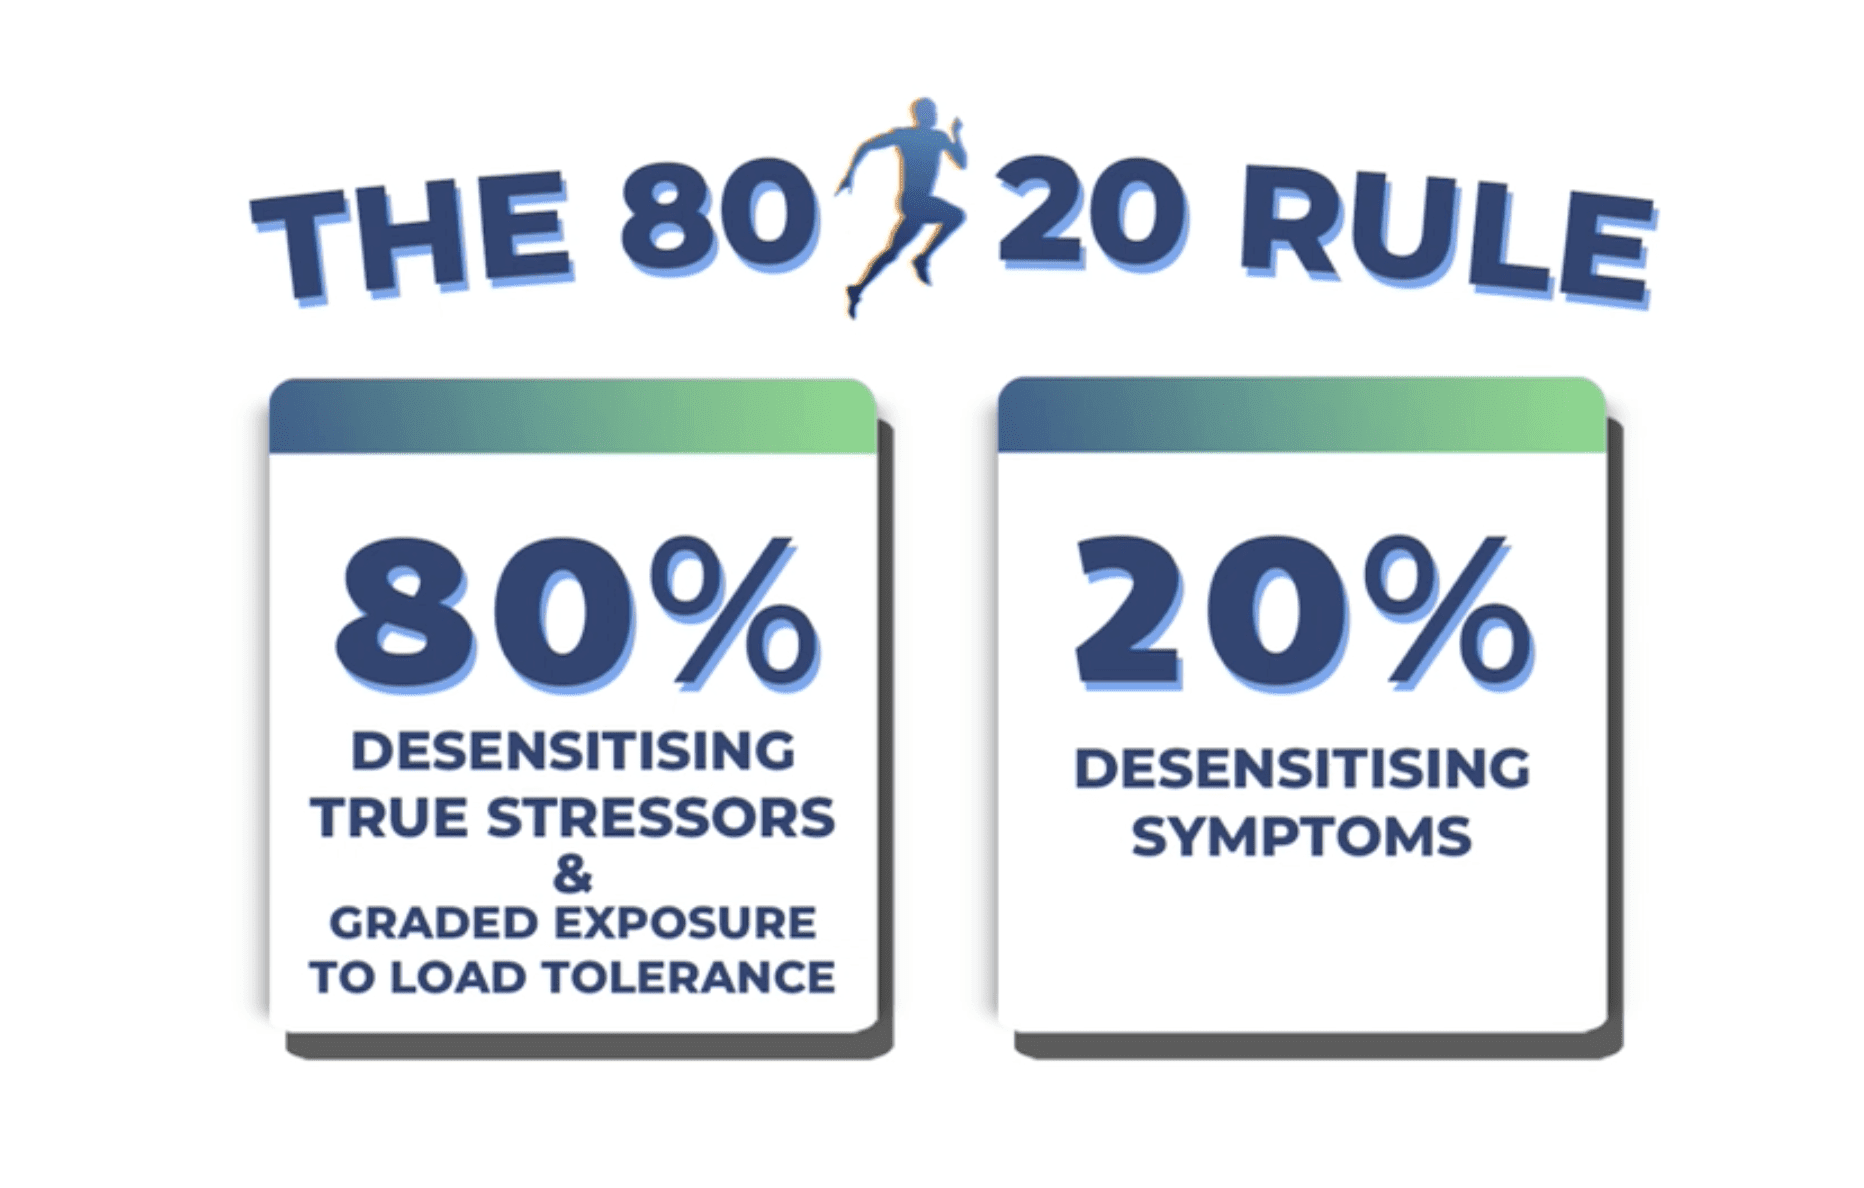 Using the 80/20 rule for physiotherapy reviews and referrals